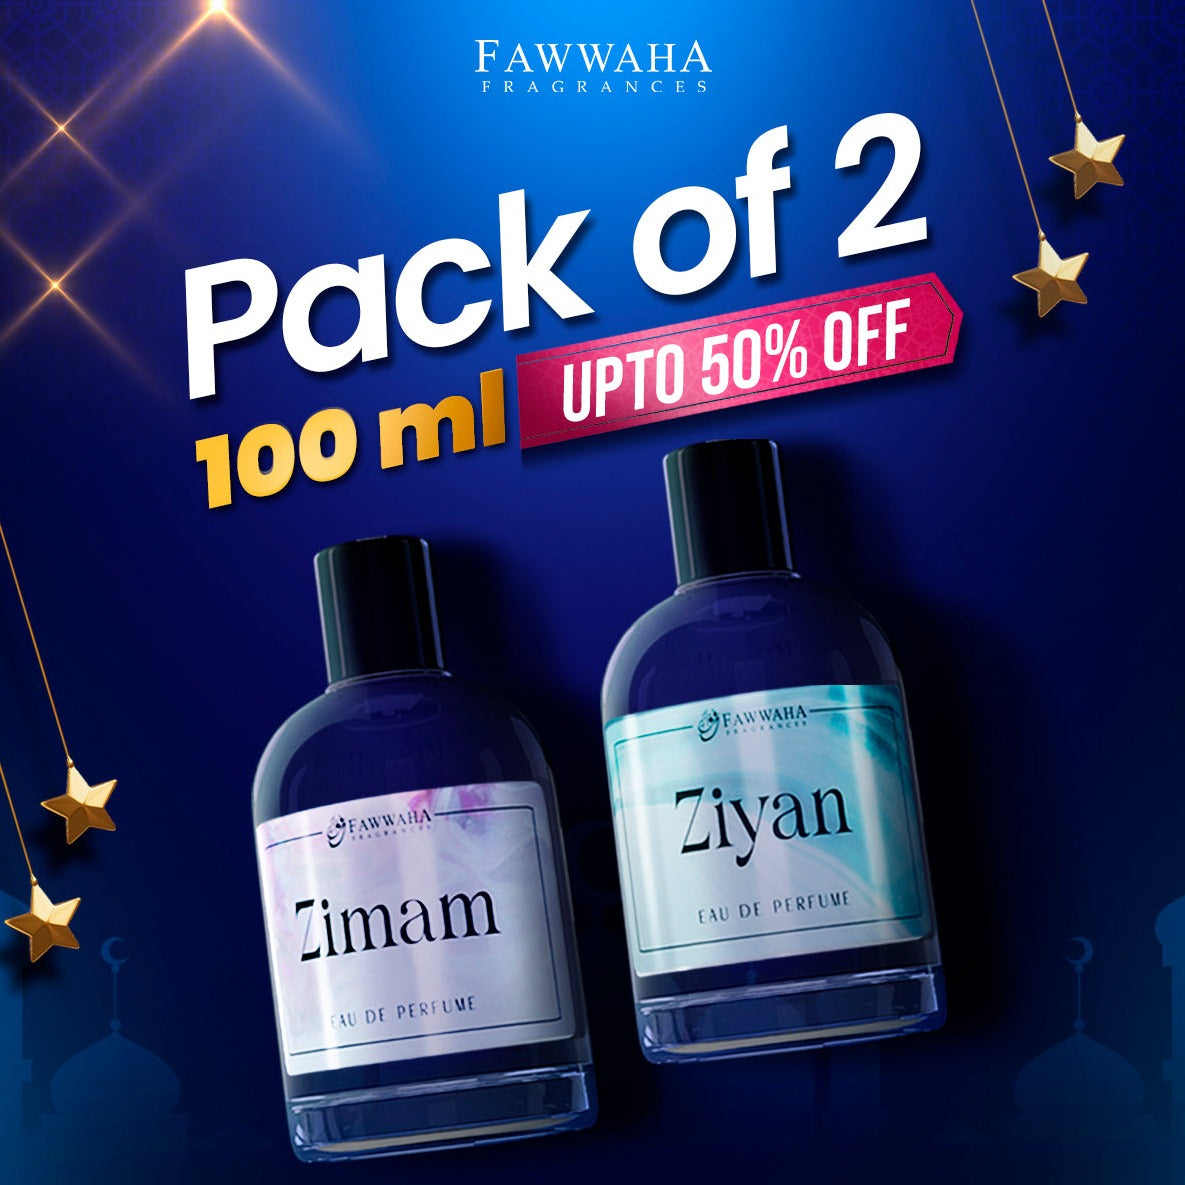 Pack of 2 Deal - 100 ml